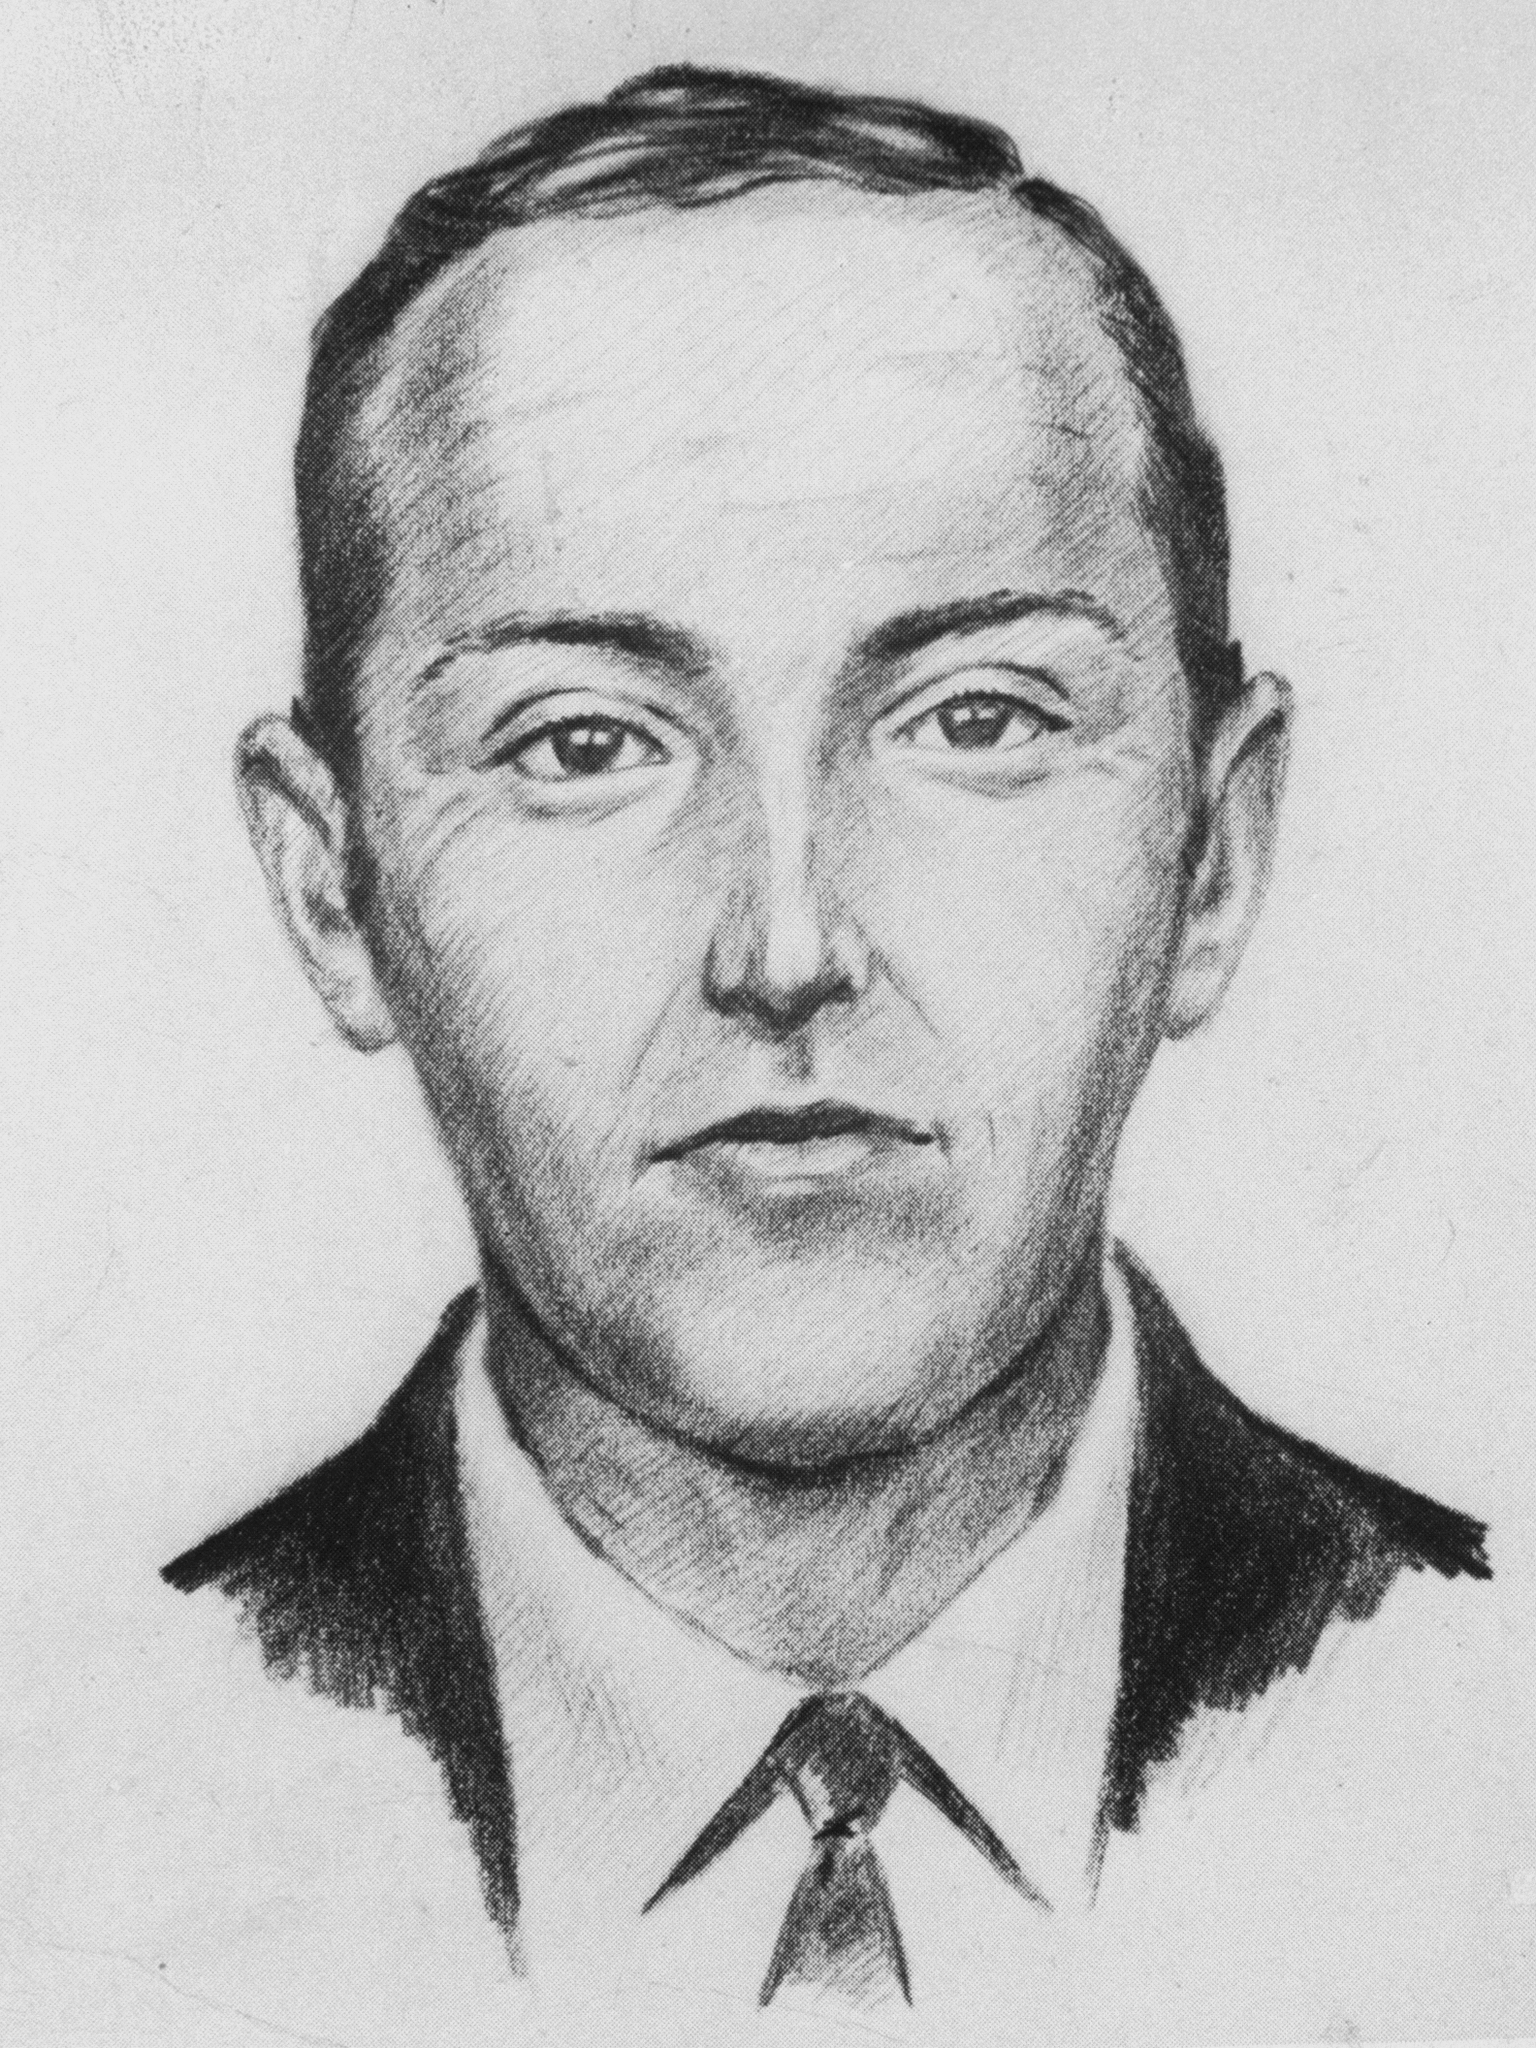 FBI sketch of hijacker D.B. Cooper (The LIFE Picture Collection/Getty Images.)